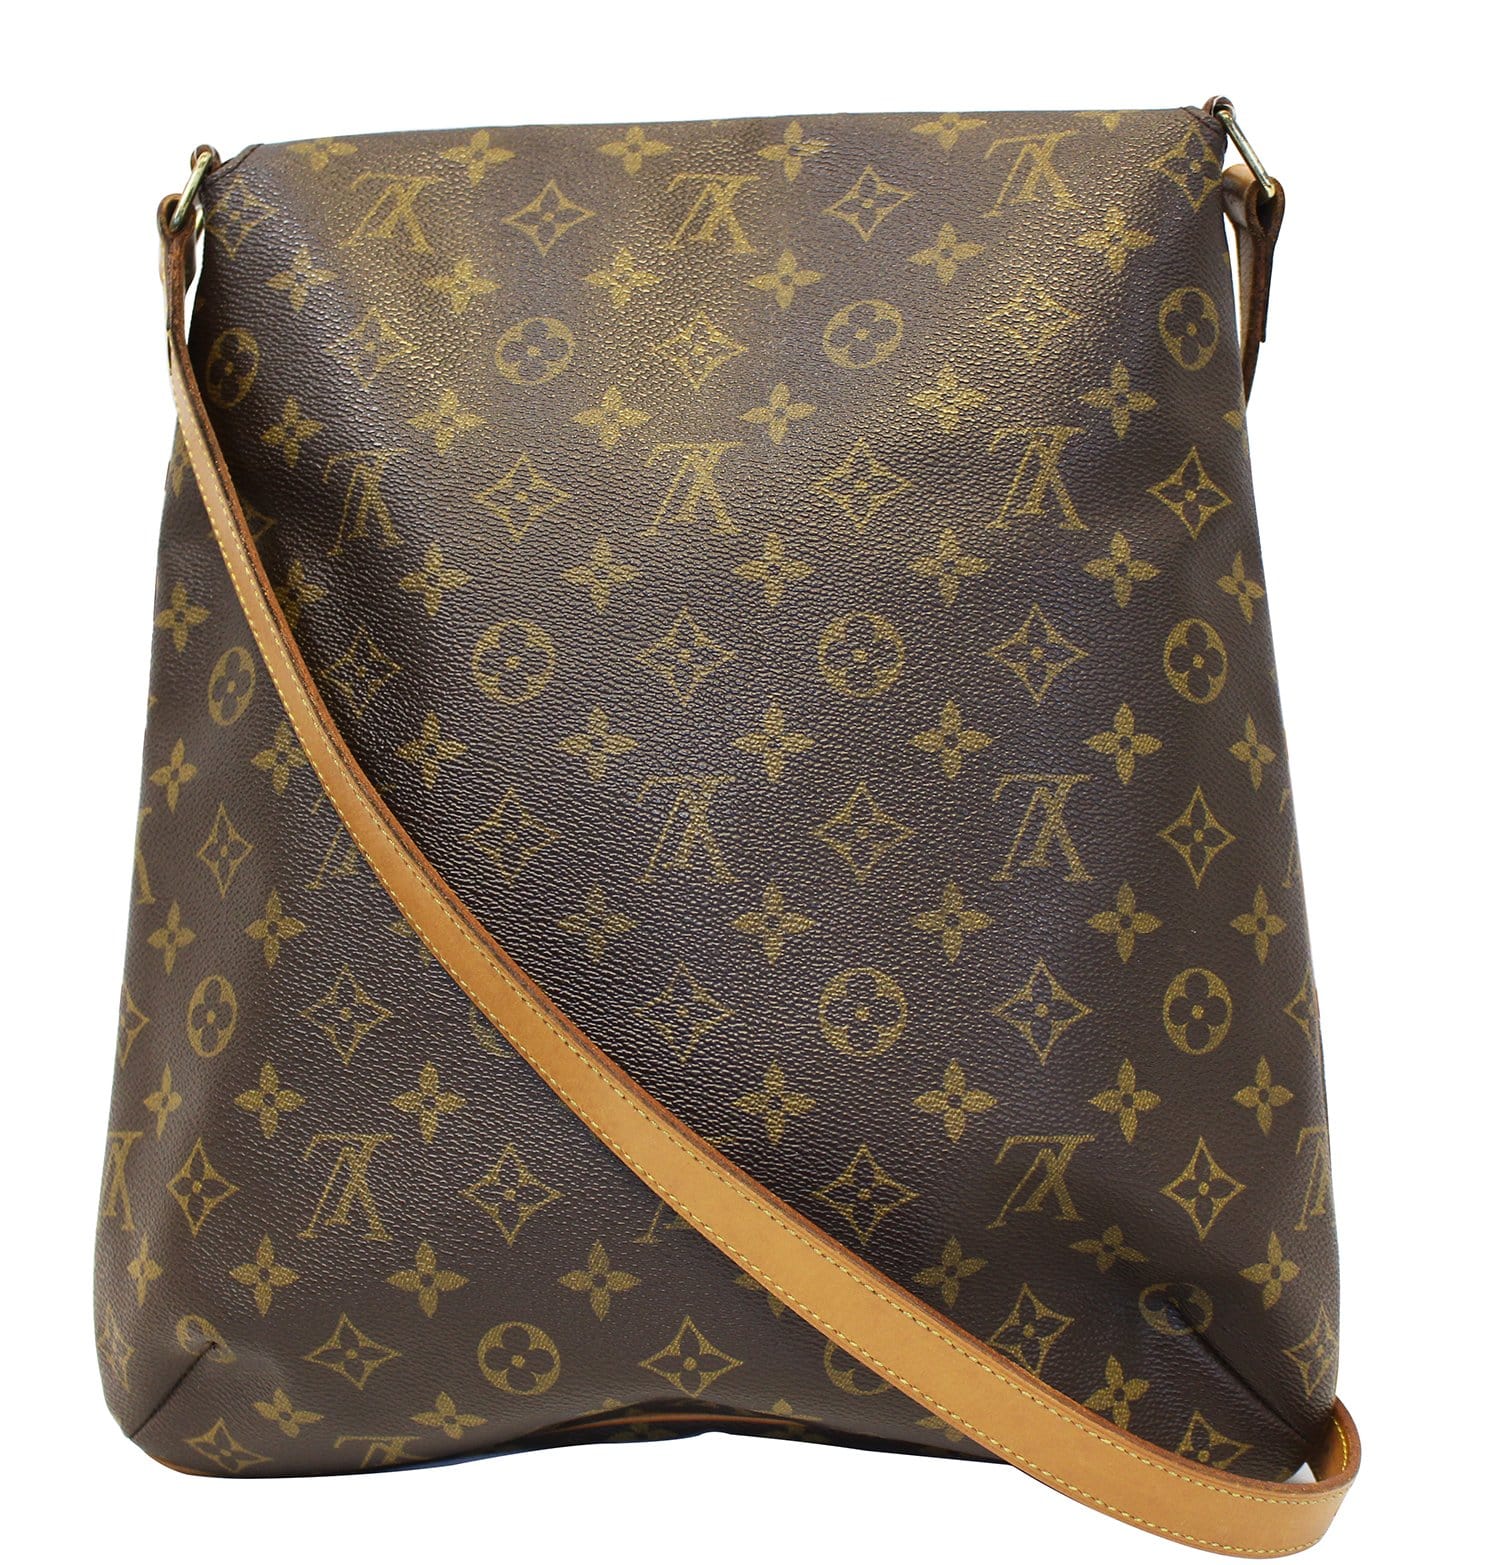 BESACE LOUIS VUITTON MUSETTE - LuxeForYou